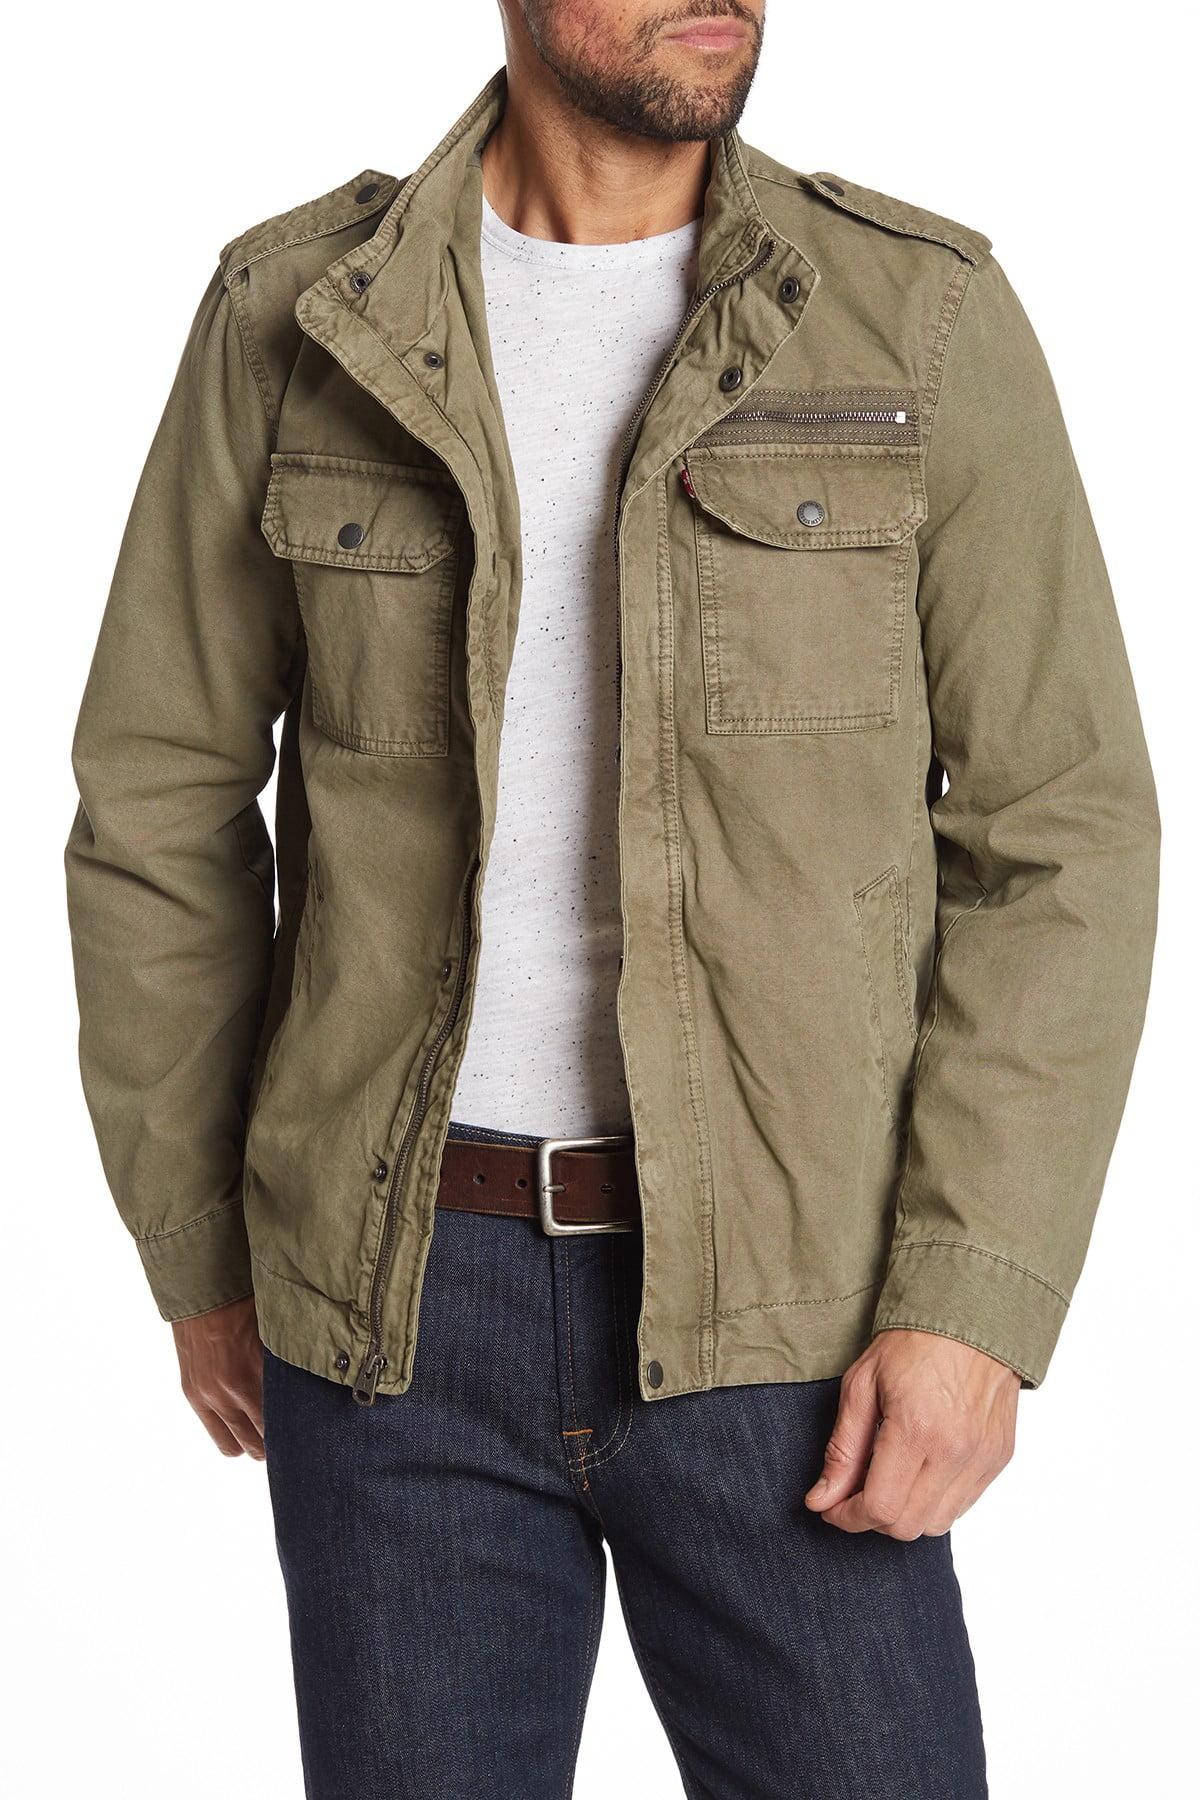 Levi's Cotton Reverse Twill Military Jacket in lt Olive (Green) for Men